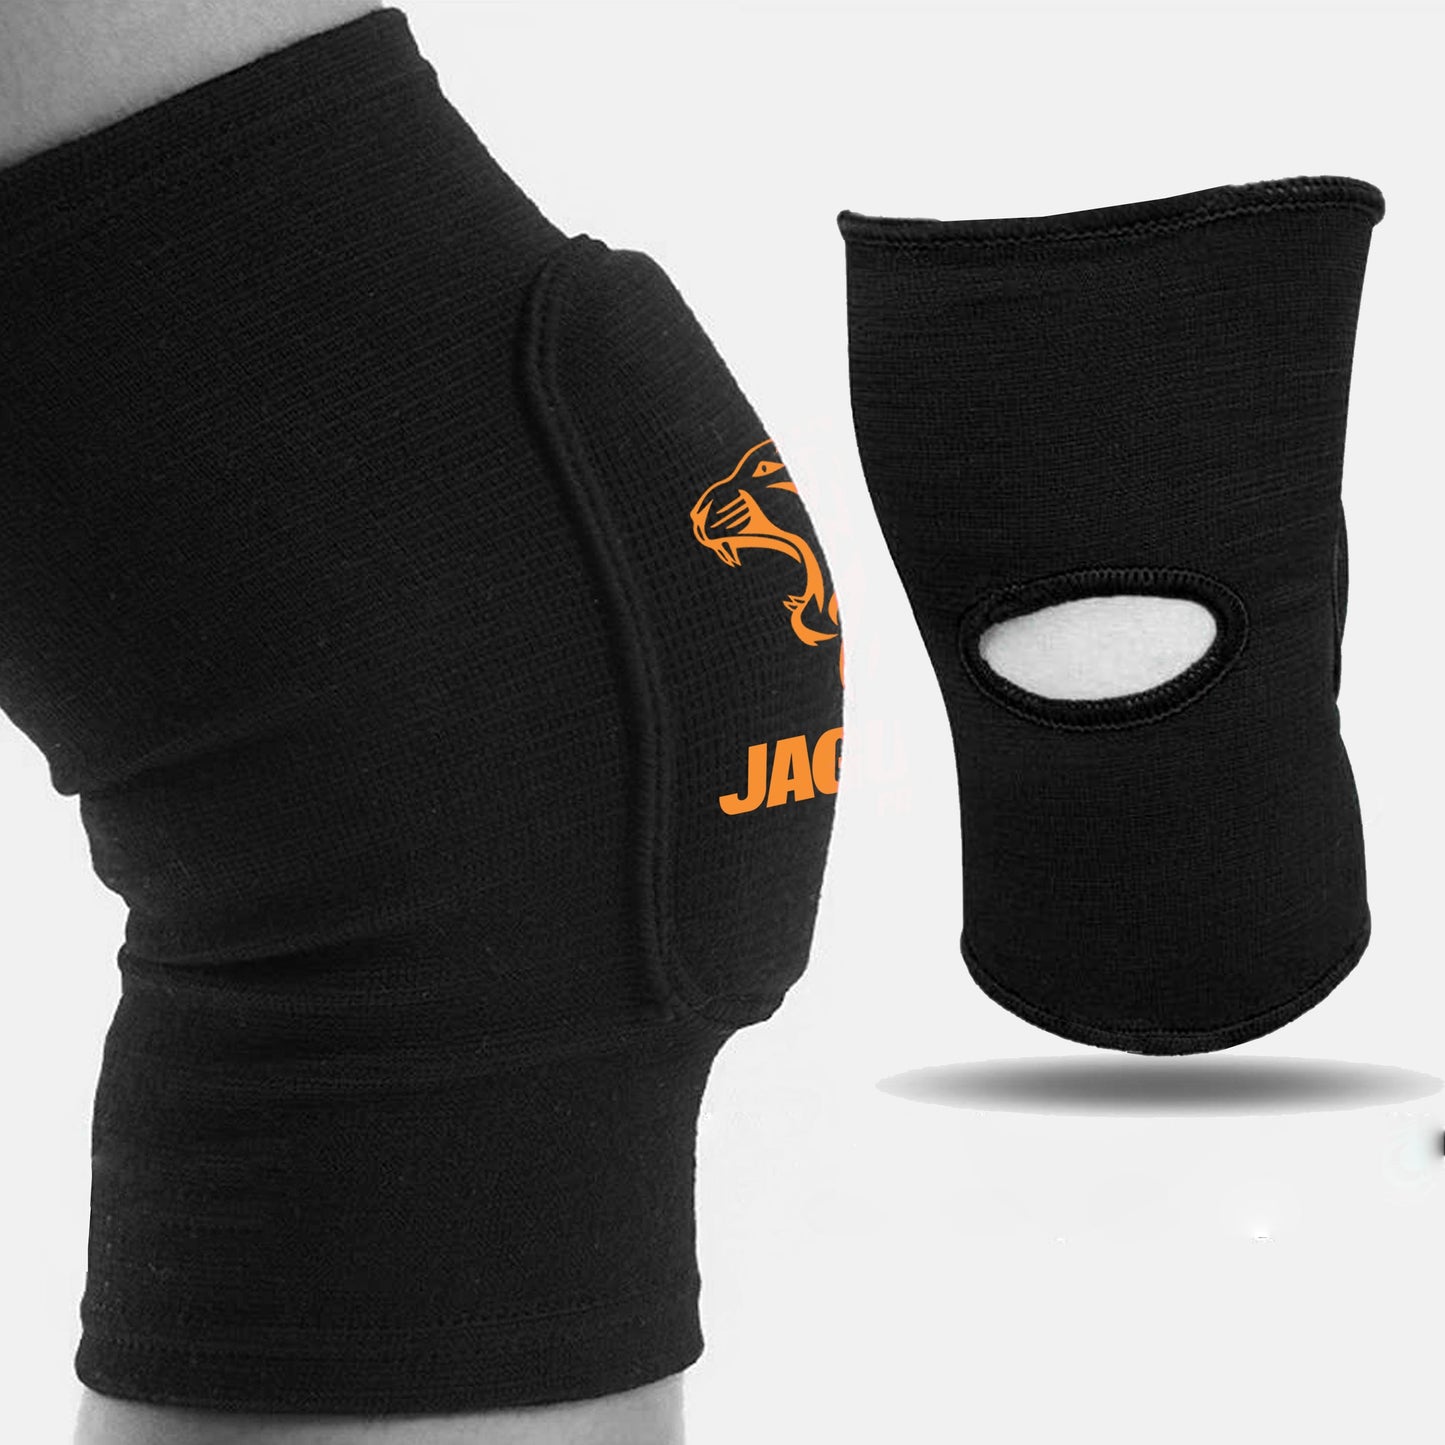 Jaguar Pro Gear - Midnight Knee Pad Pair For Boxing MMA Muay Thai And General Use Kids Adults Unisex